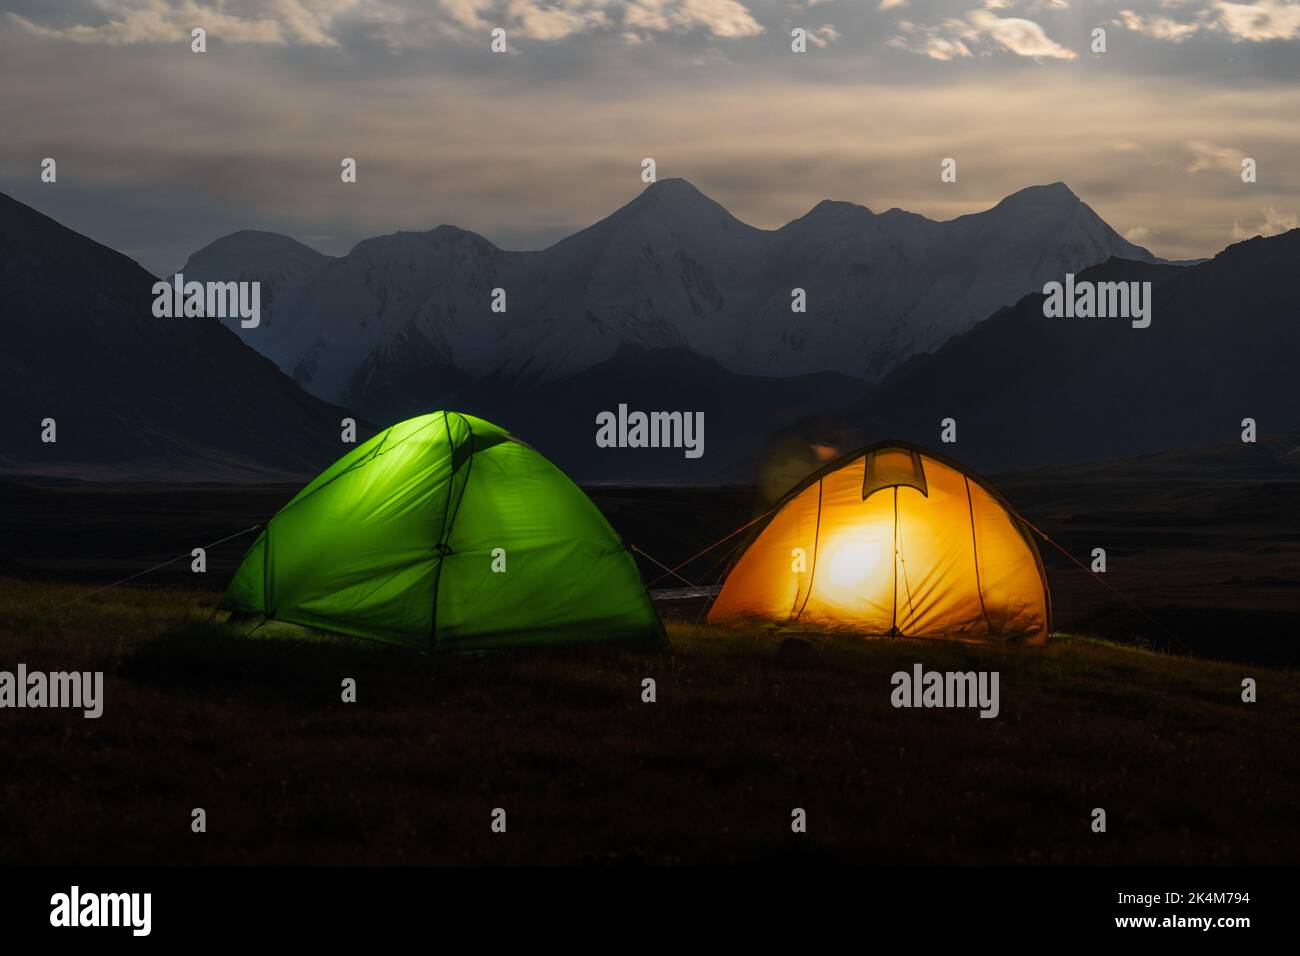 Colourful tents with lights under moonlit landscape of Sary Jaz Valley at night, Kyrgyzstan, Tien Shan mountains Stock Photo